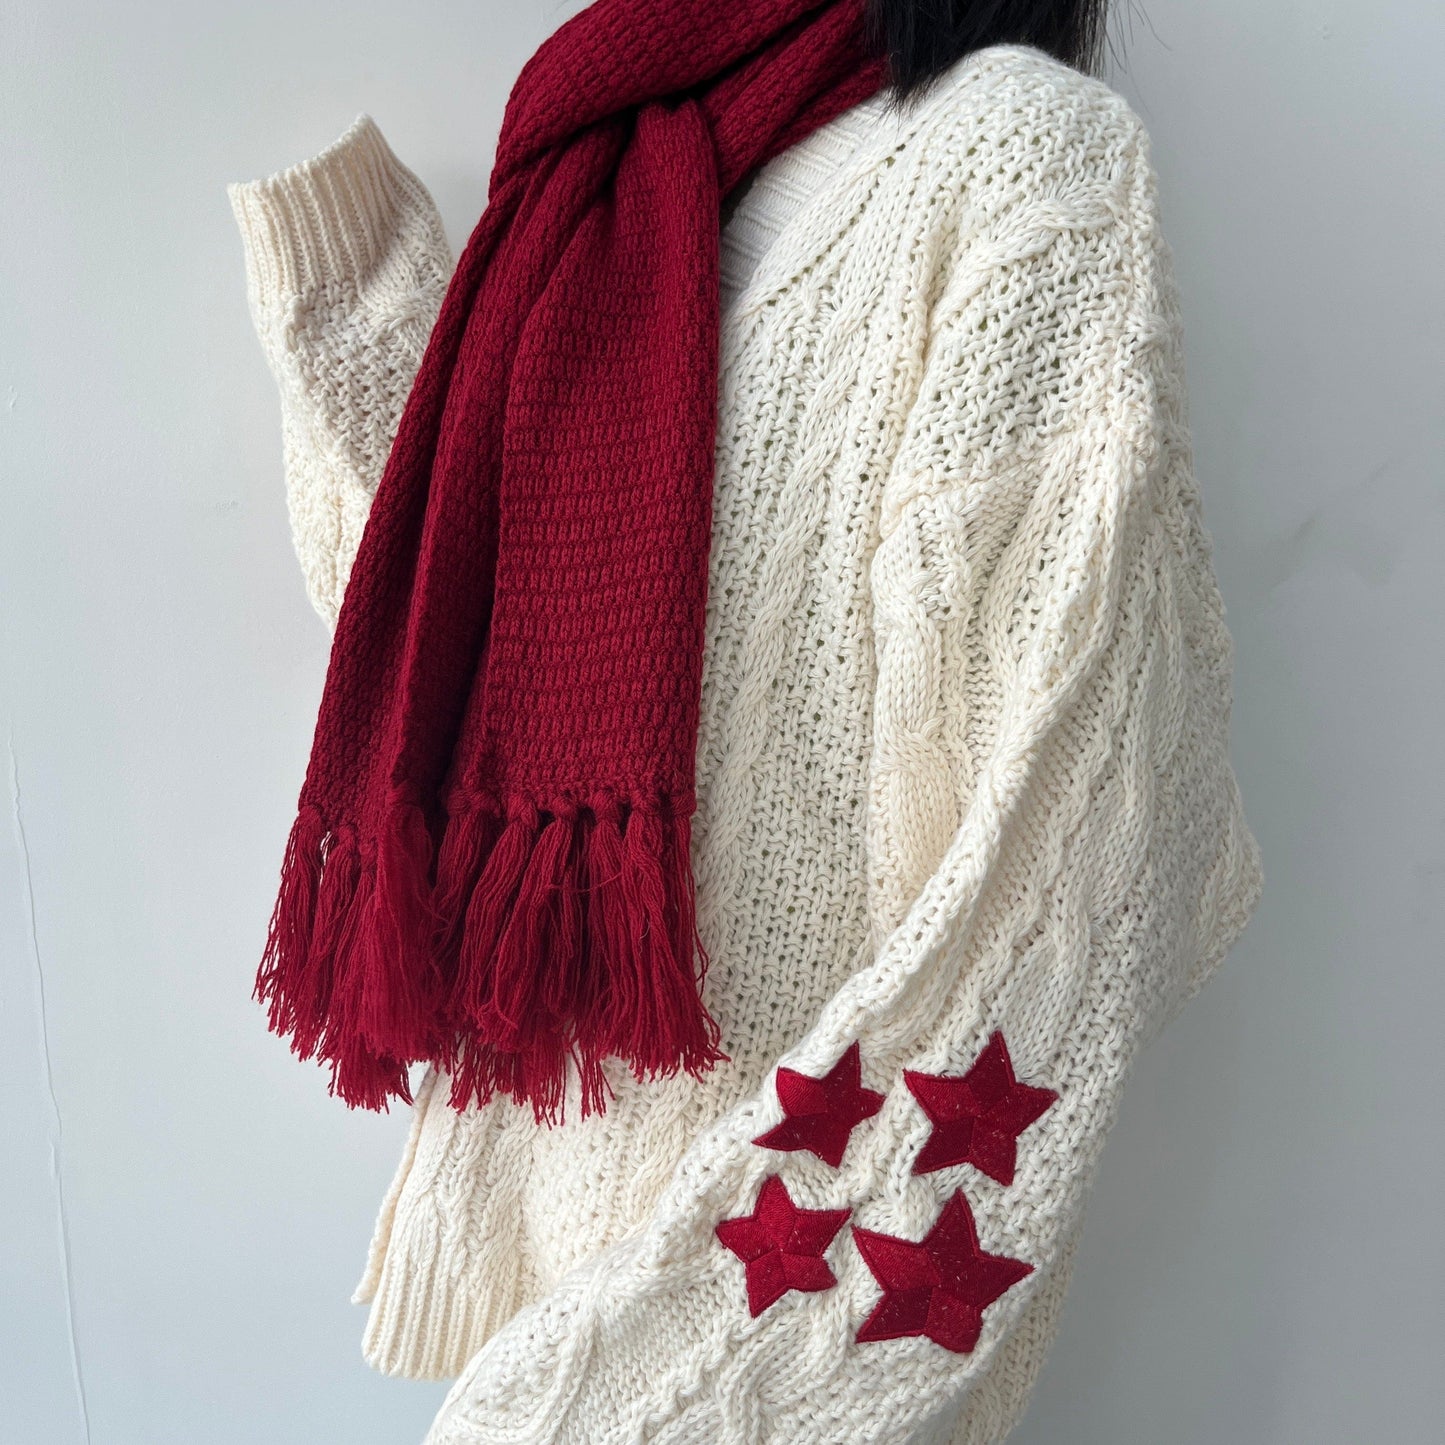 Red Cardigan Taylors Version Sweater With All Too Well Scarf